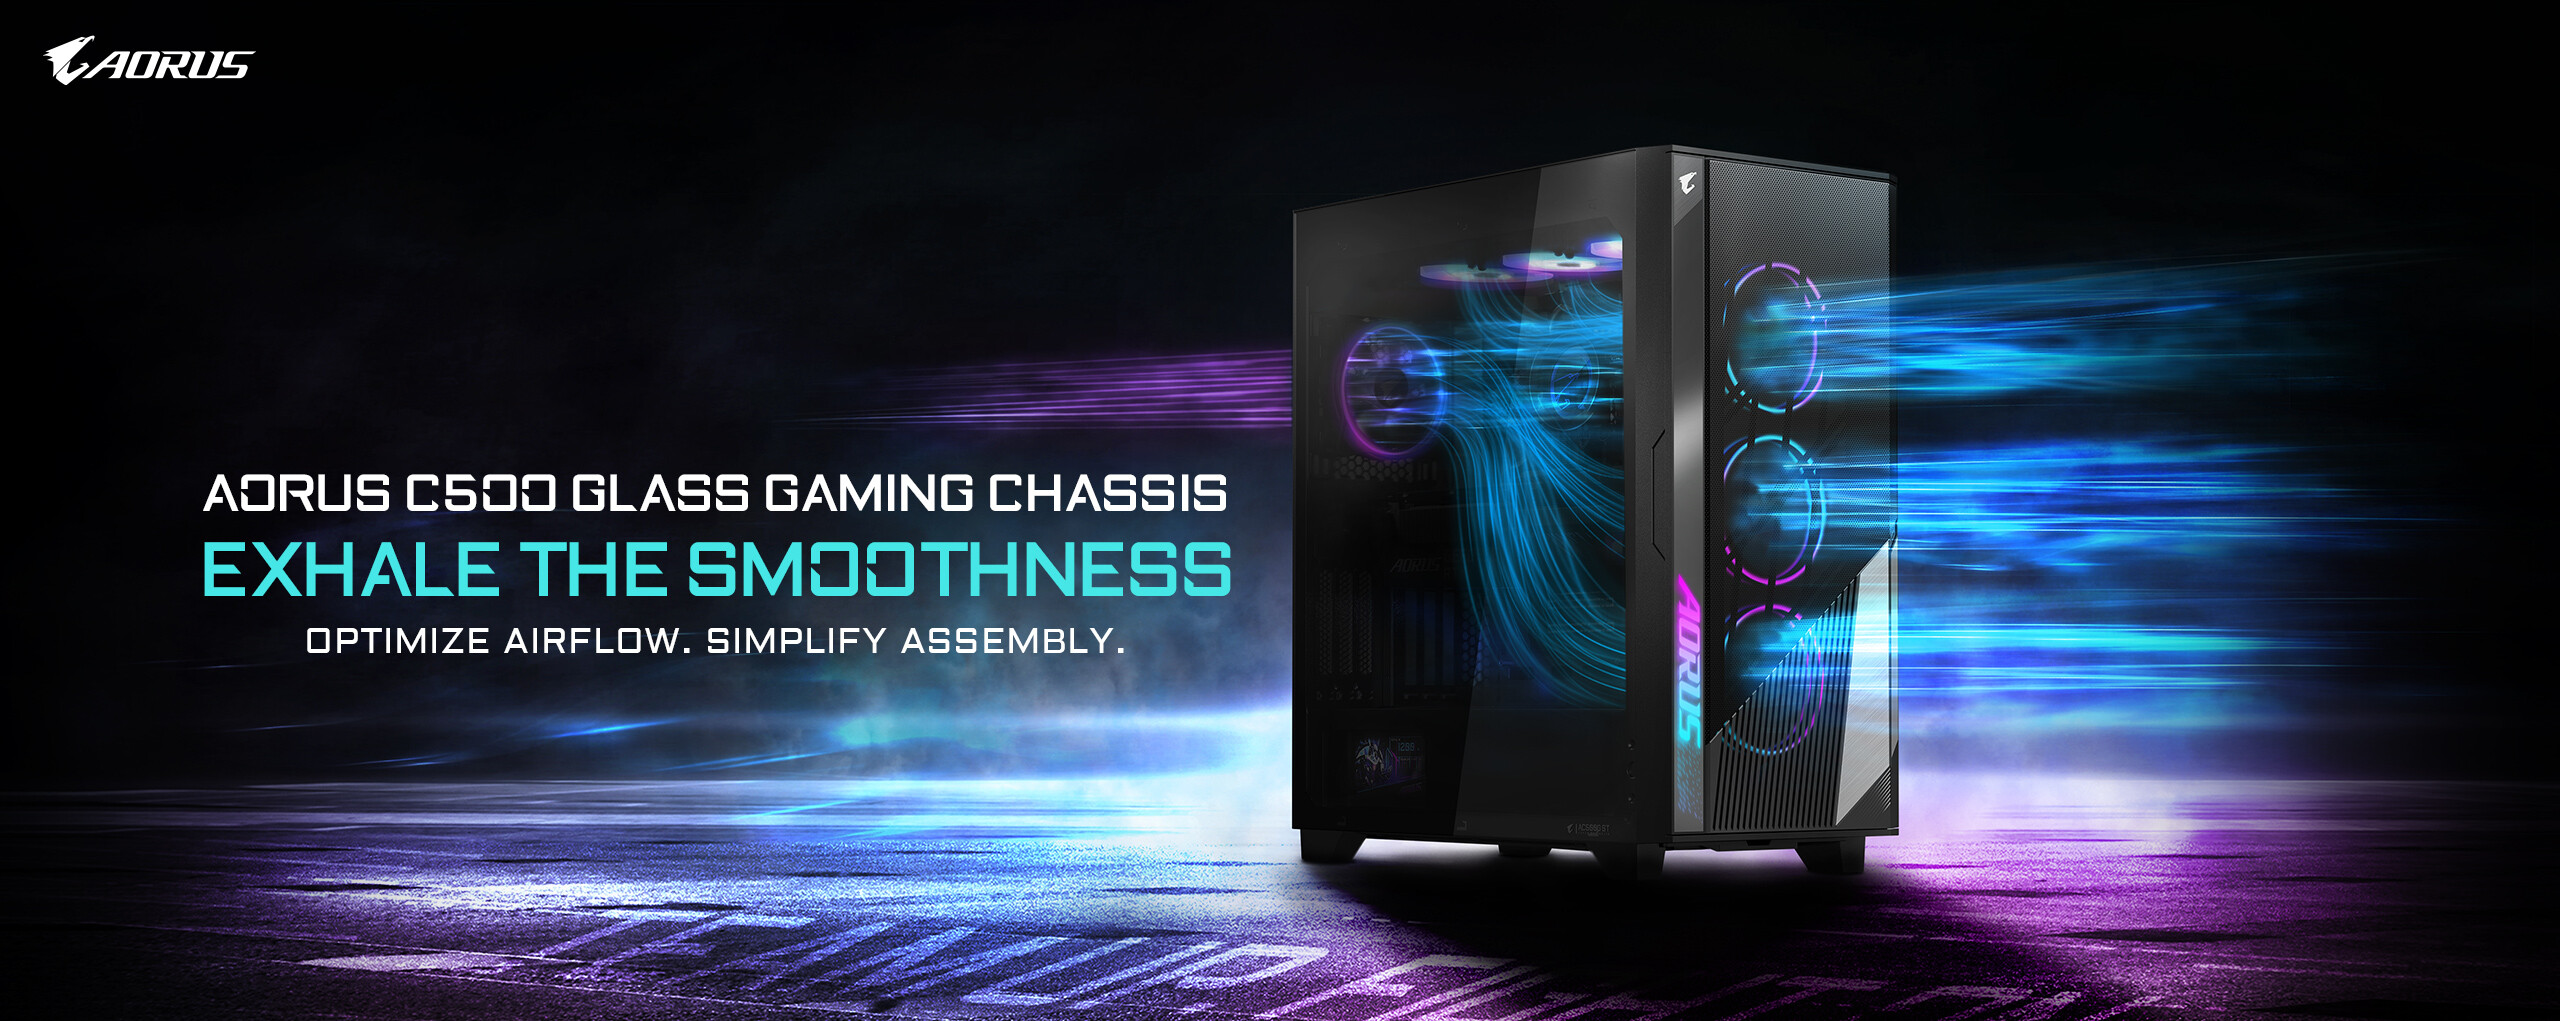 AORUS C500 GLASS: the new gaming case from GIGABYTE